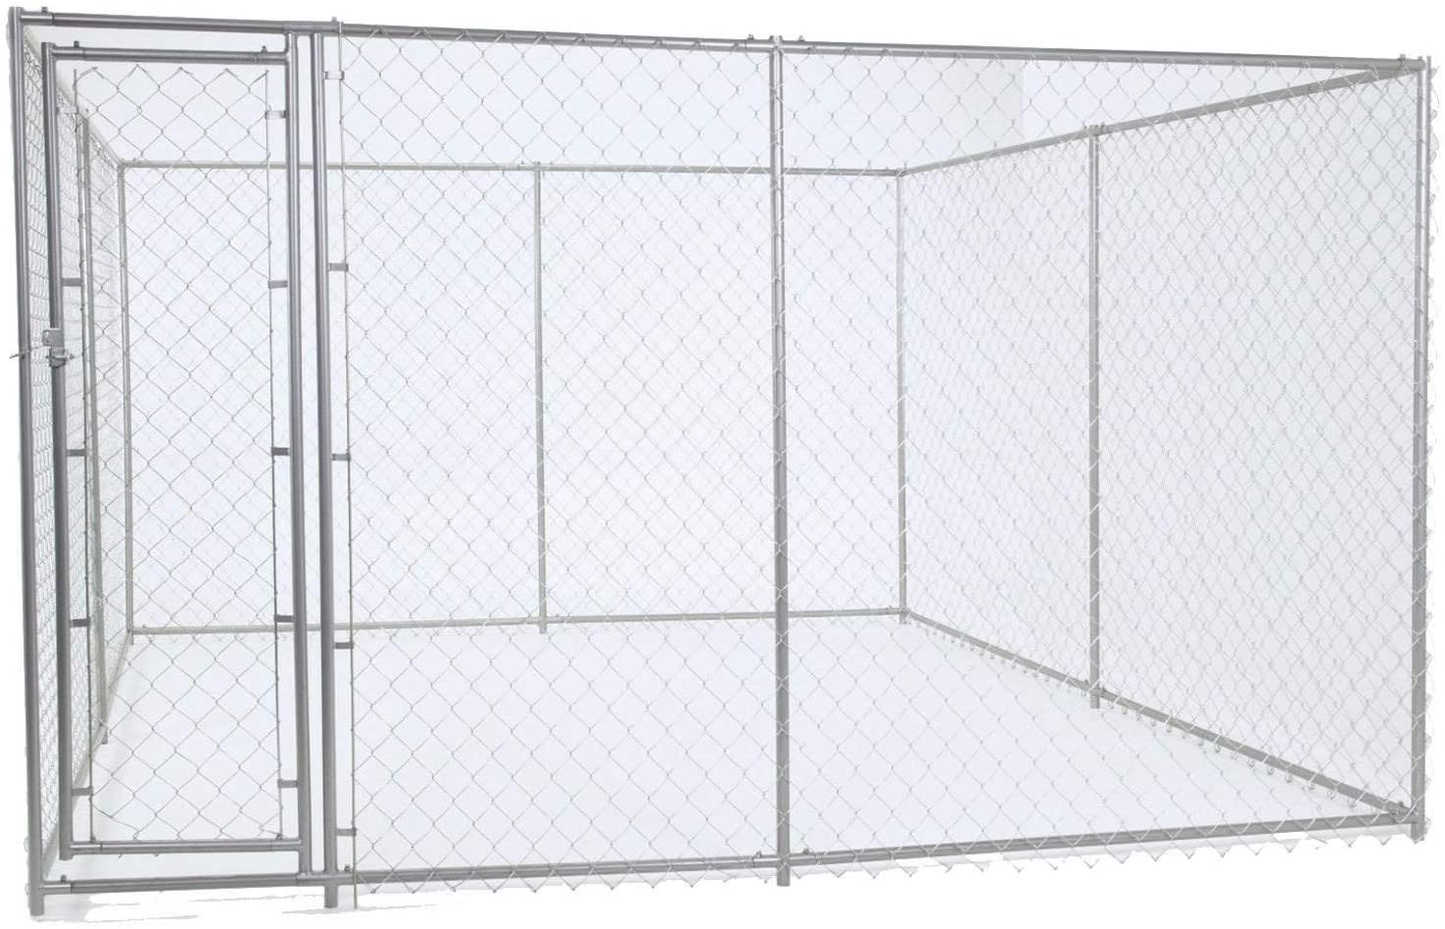 Lucky Dog 61528EZ 10' X 10' X 6' Heavy Duty Outdoor Galvanized Steel Chain Link Dog Kennel Enclosure with Latching Door, 1.5" Raised Legs, and Weatherguard 10 X 10 Foot Roof Cover